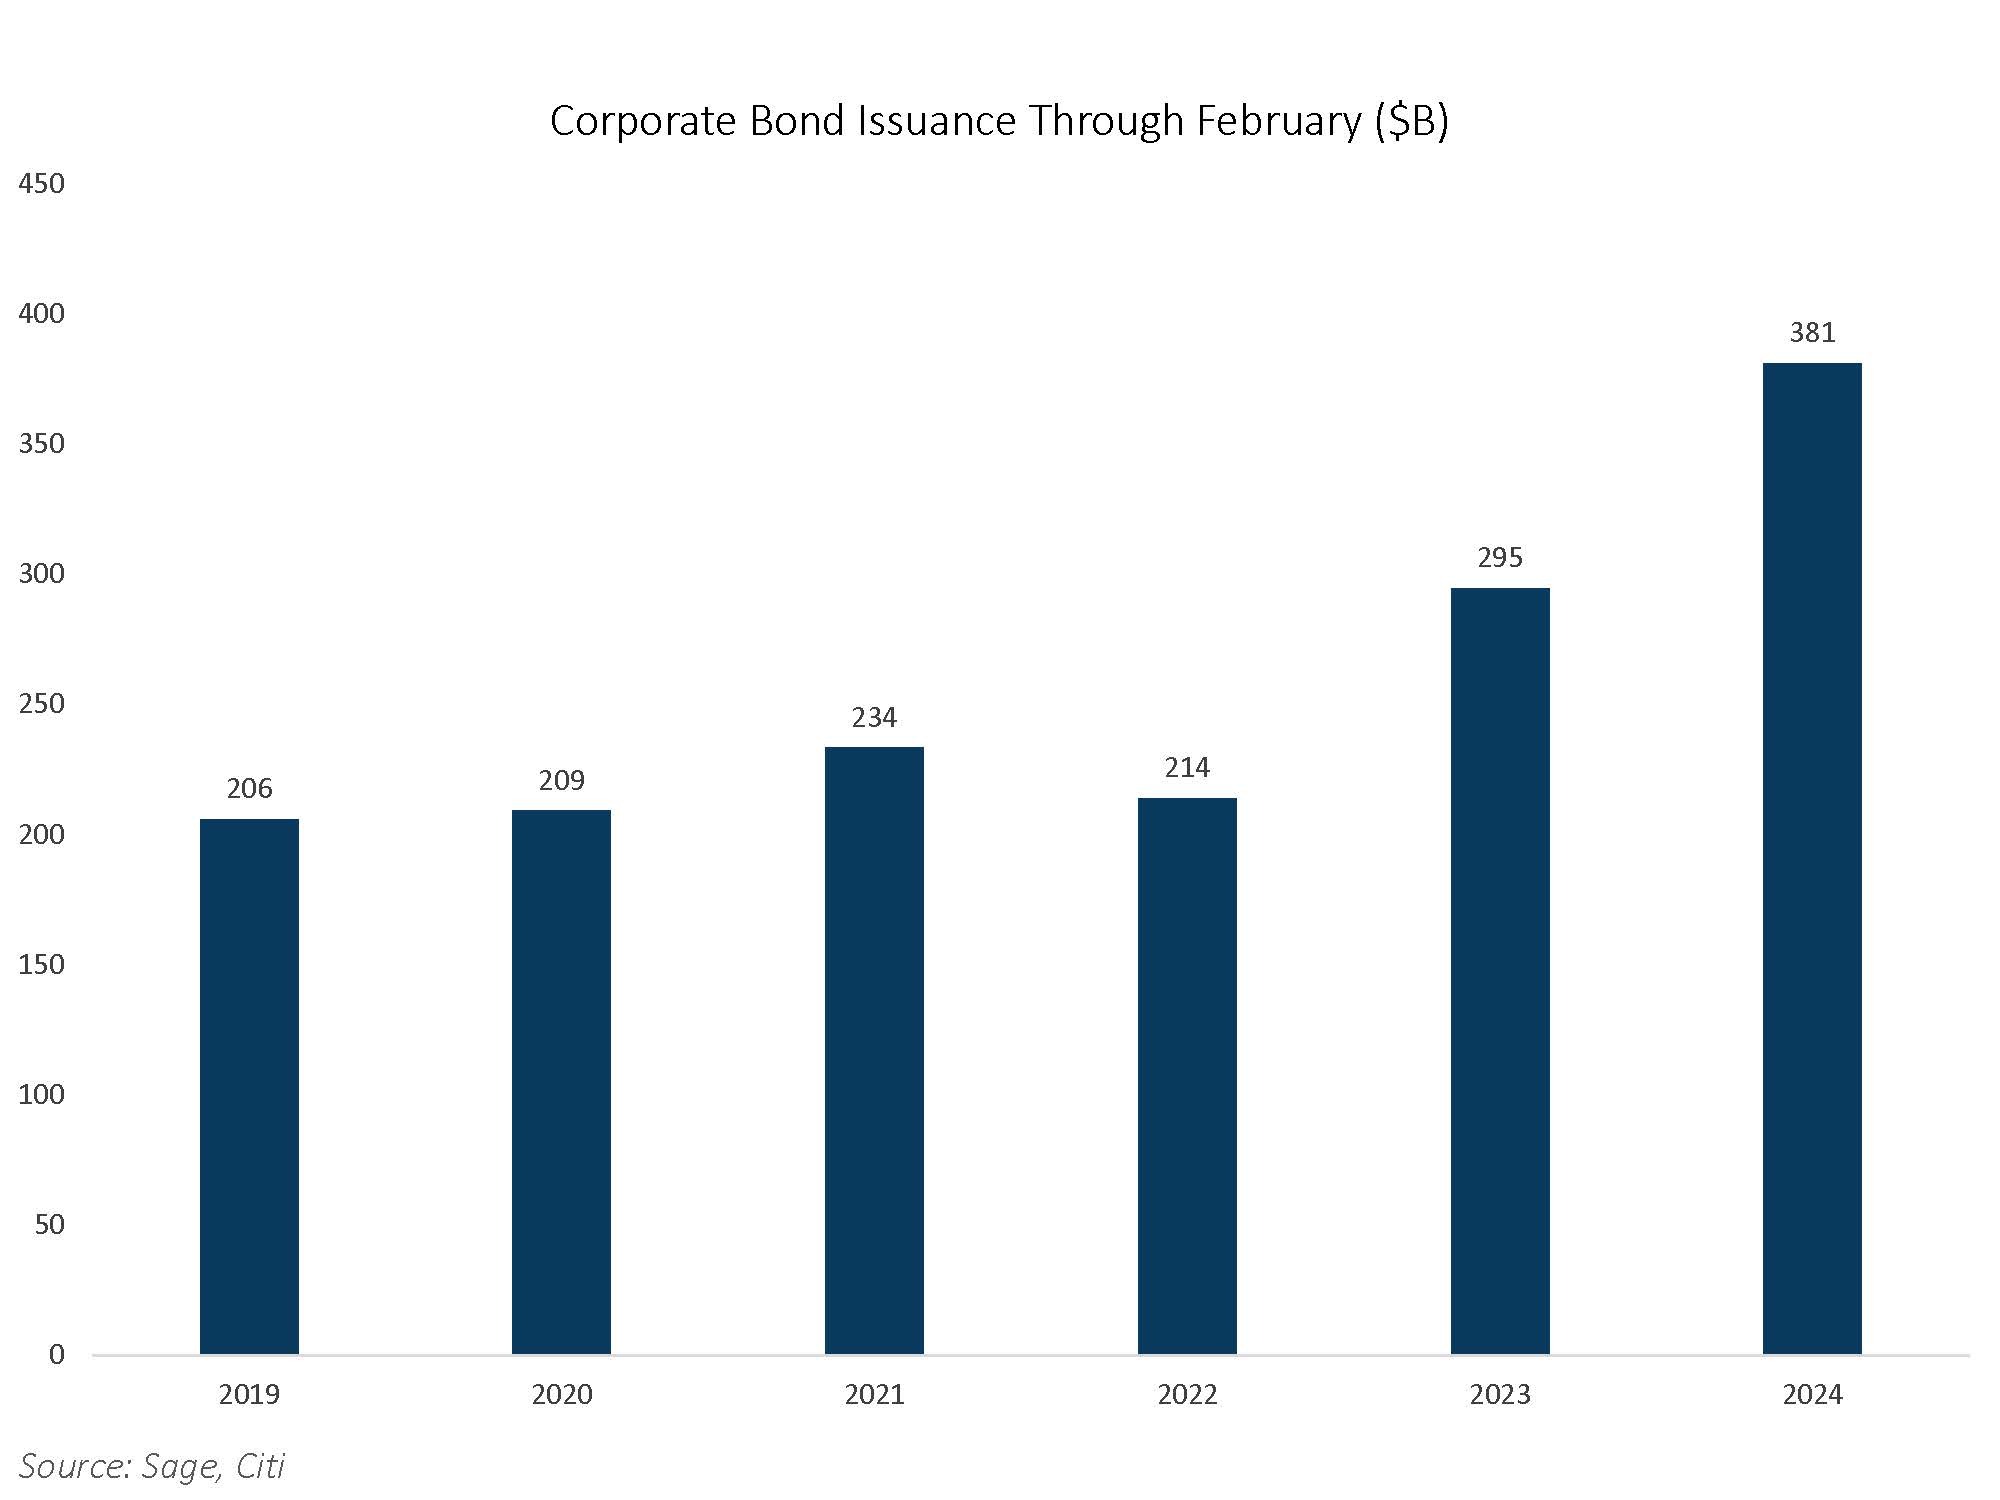 Corporate Bond Issuance Through February in billions